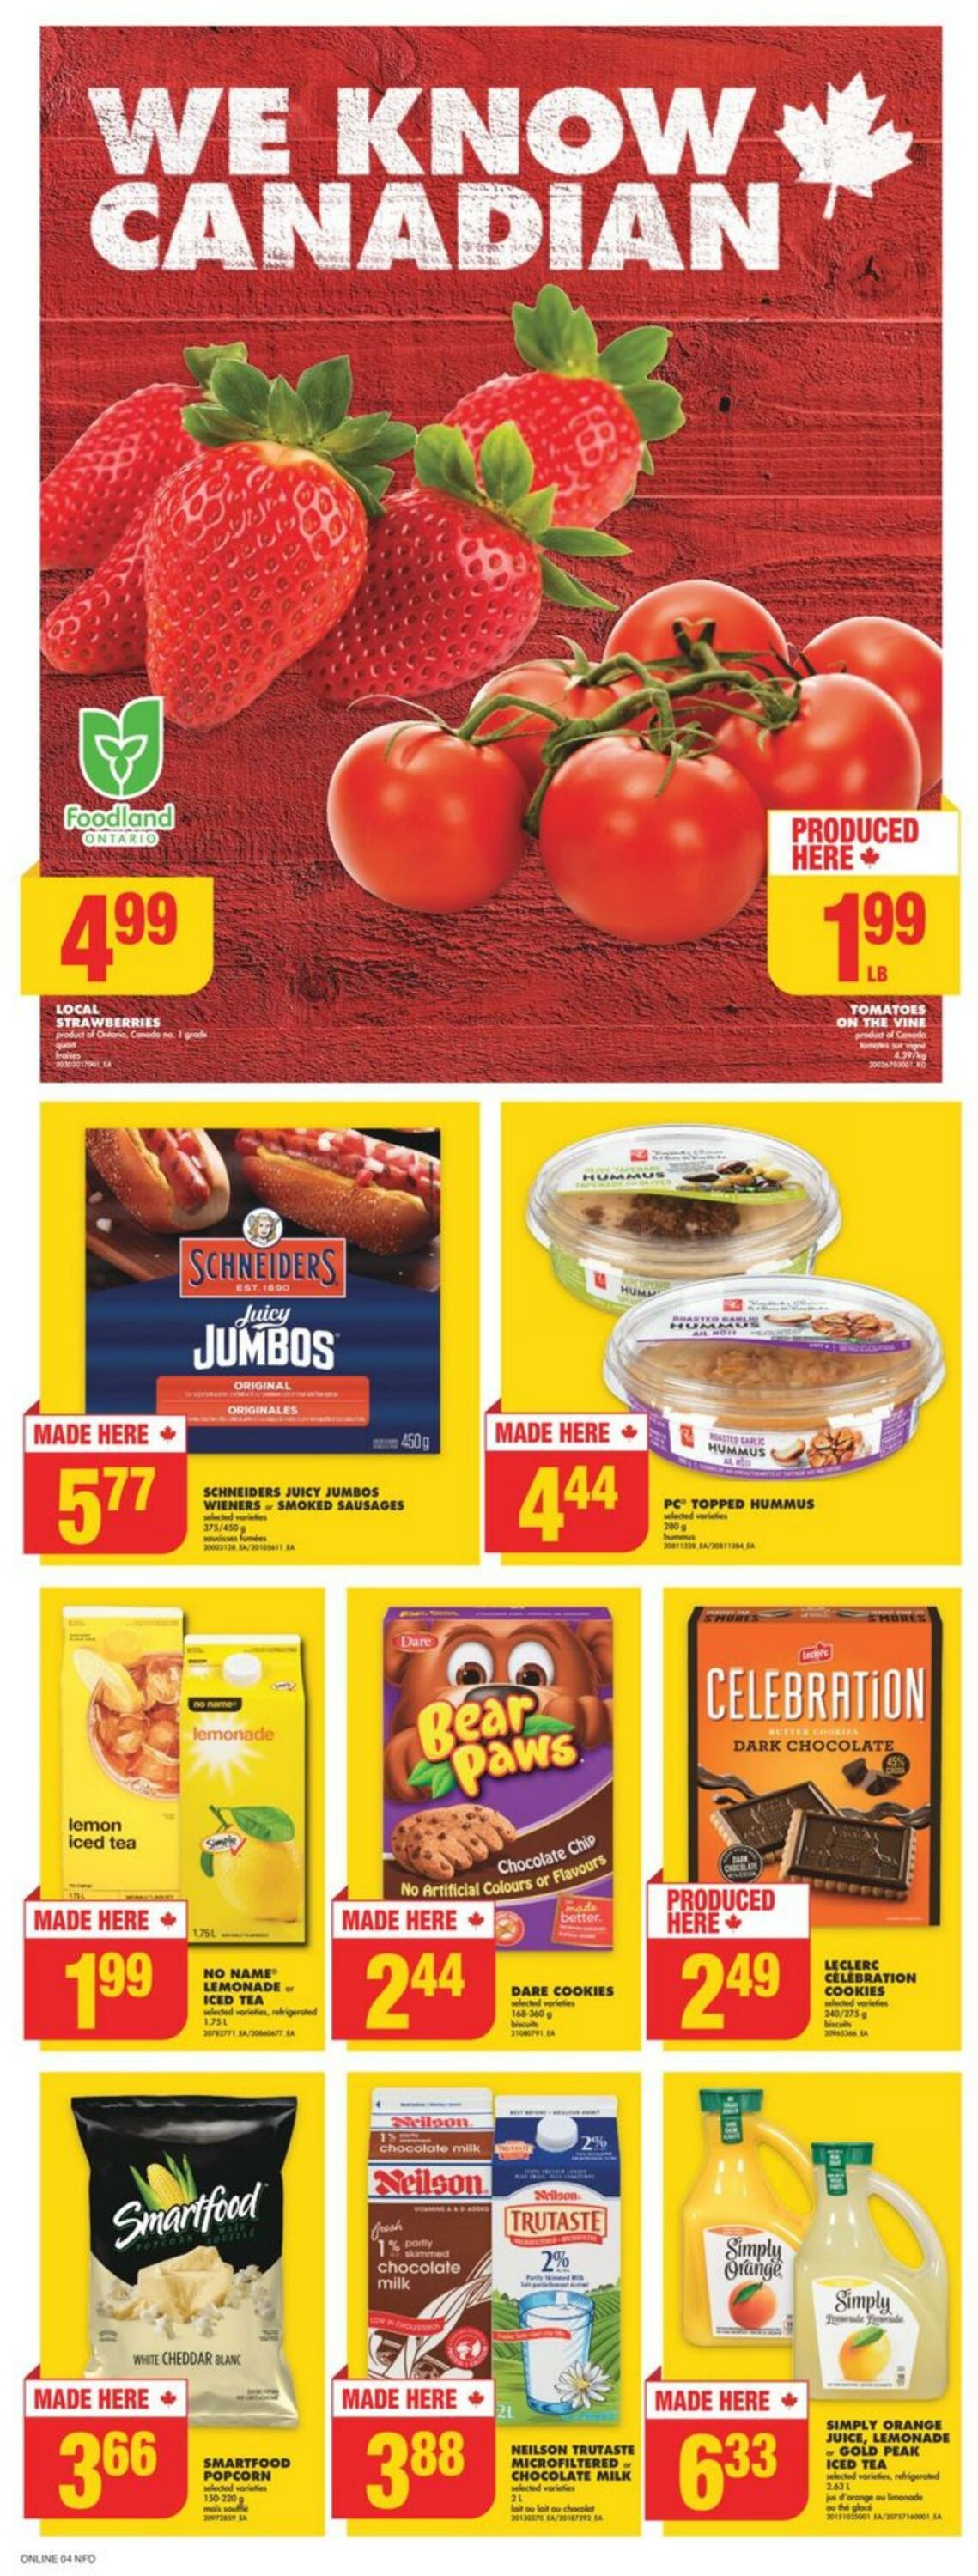 No Frills Promotional Flyer - Ontario - Canada Day - Valid from 29.06 ...